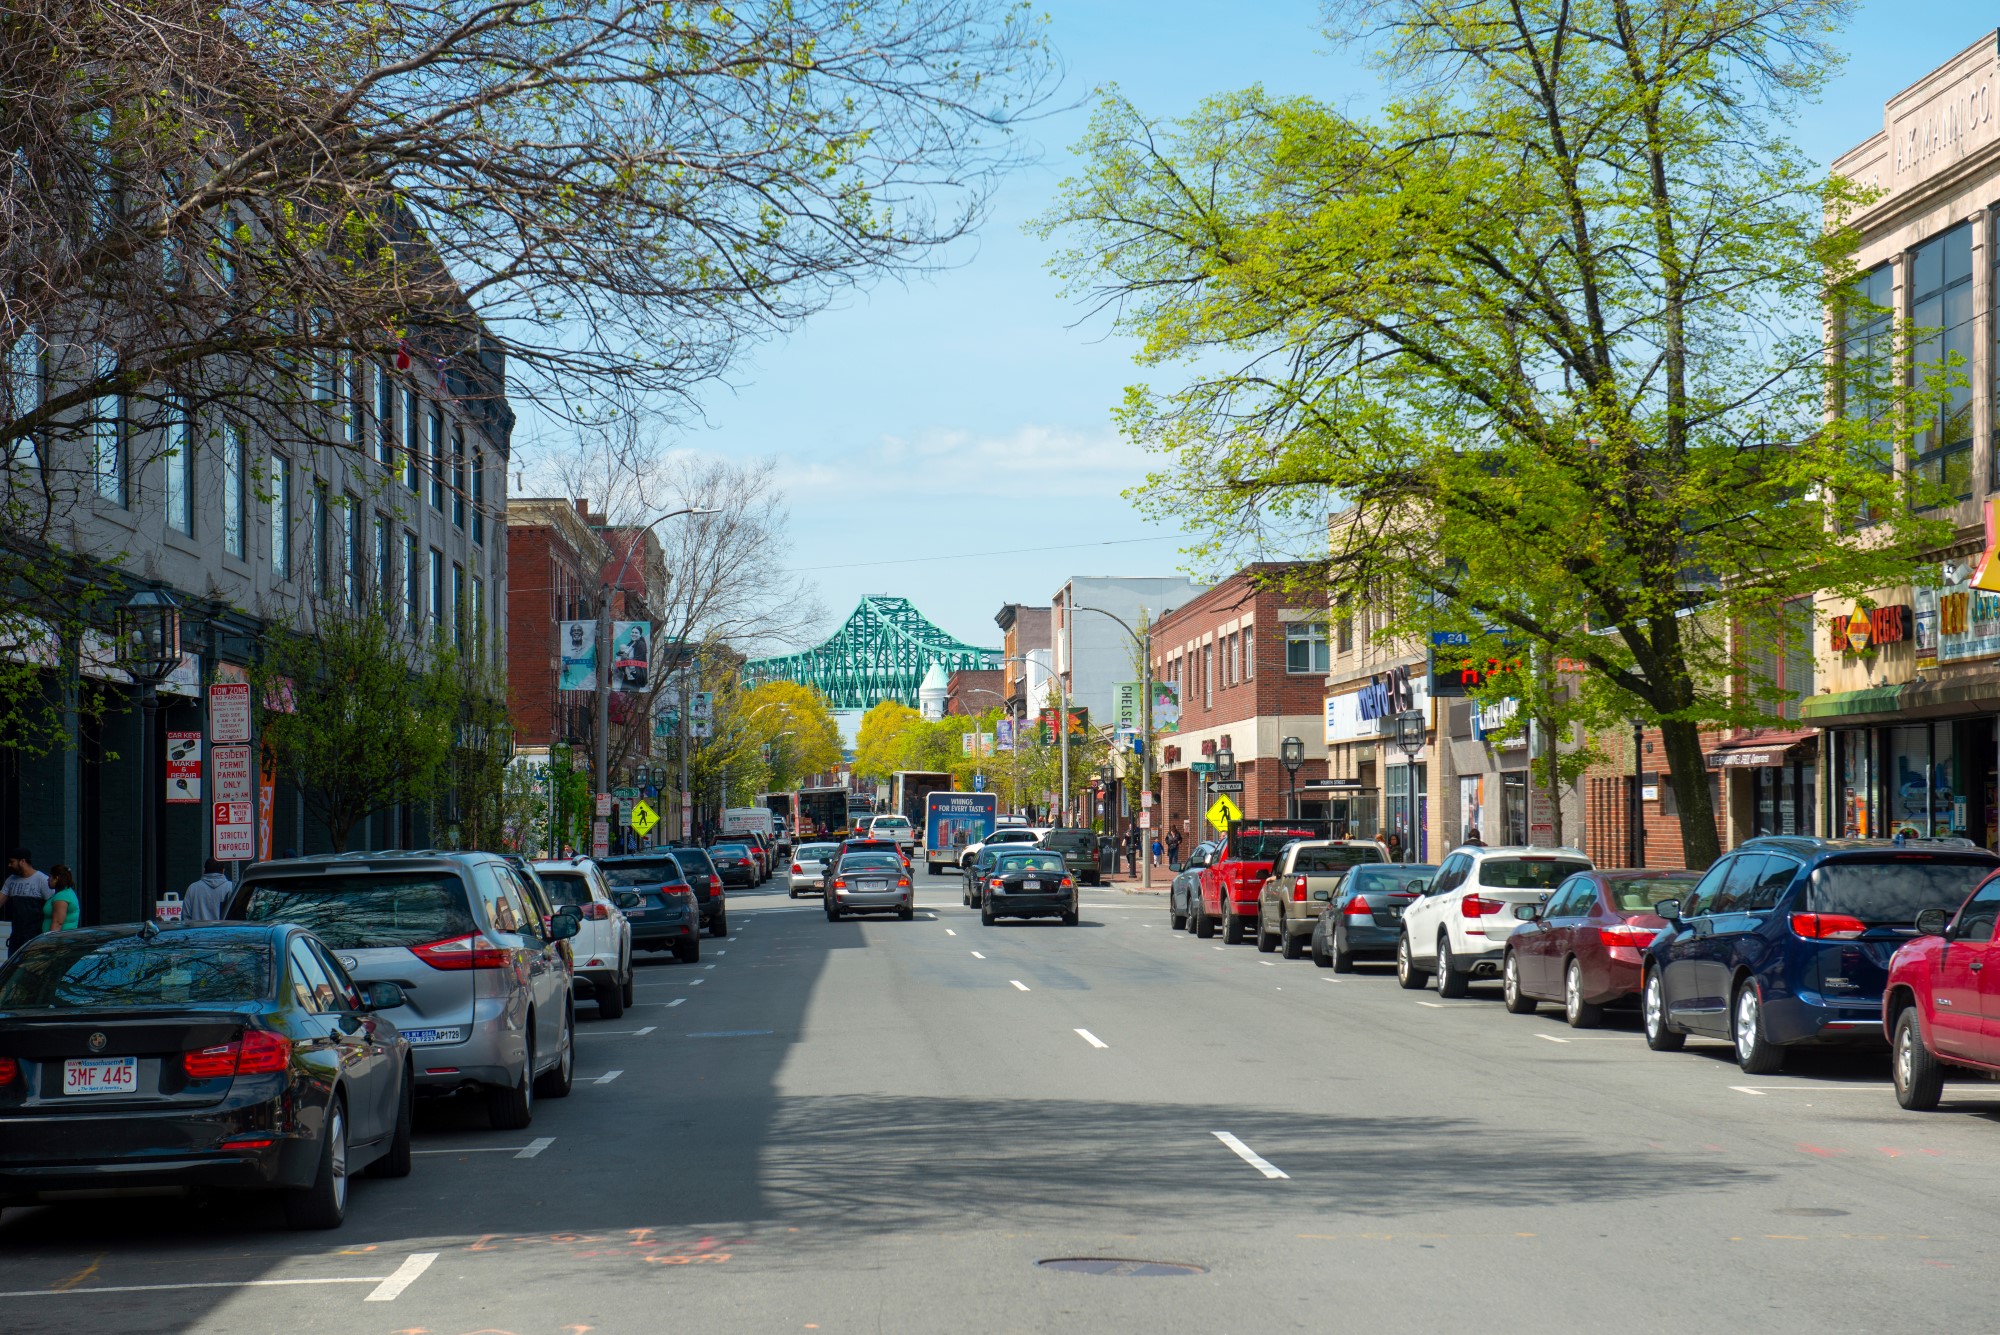 A photograph of a street in downtown Chelsea, Massachusetts. Parallel-parked cars line both sides of the road. In the distance is the Tobin Bridge.